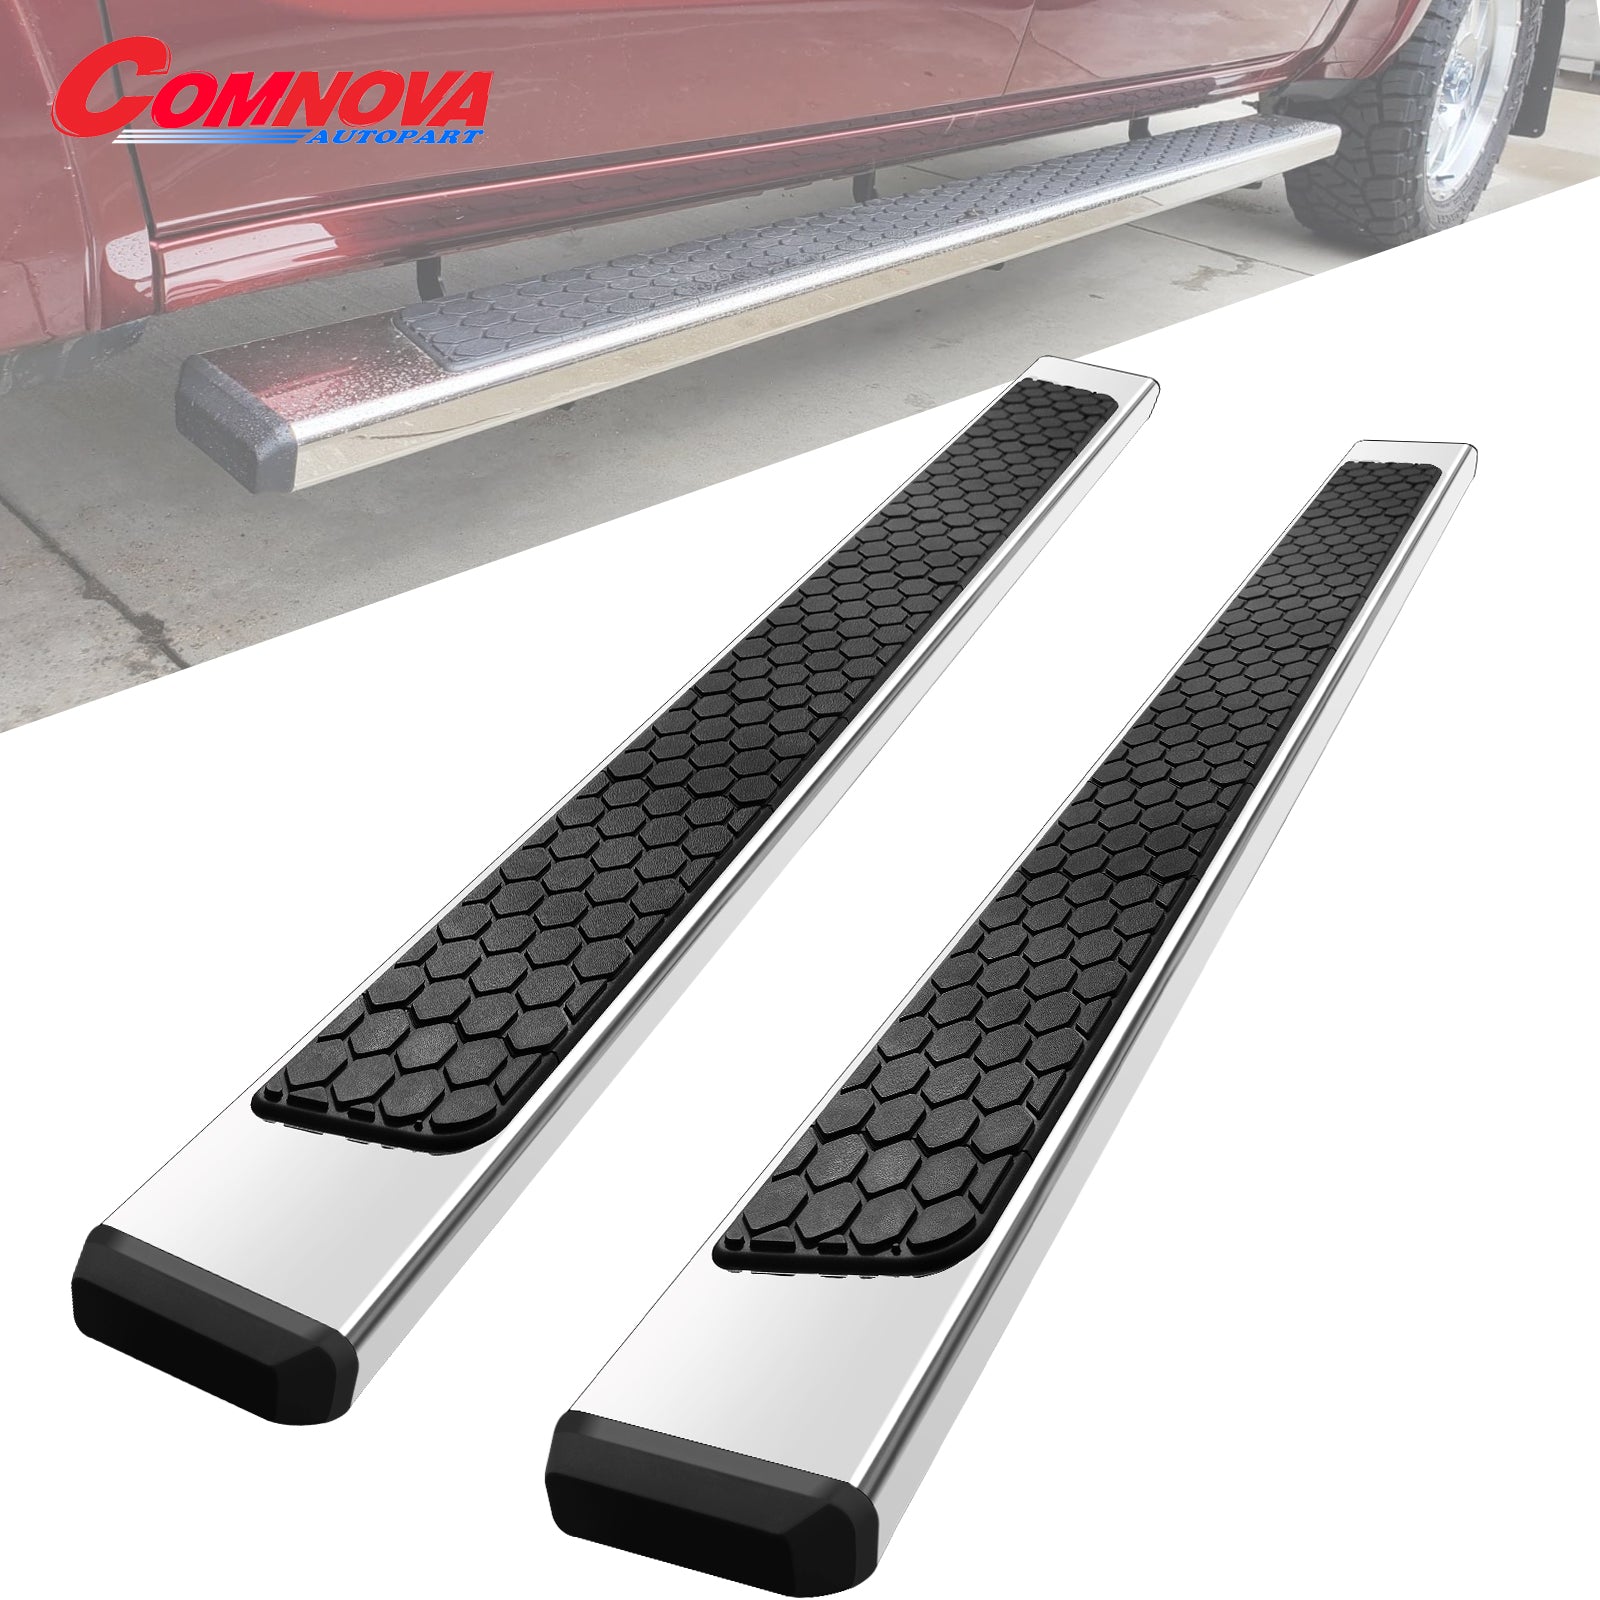 Stainless Steel Running Boards Compatible with 2009-2018 Dodge Ram 1500 Quad Cab, 2010-2024 Ram 2500 3500 Quad Cab, 2019-2024 Ram 1500 Classic Quad Cab D6 Style. - COMNOVA AUTOPART